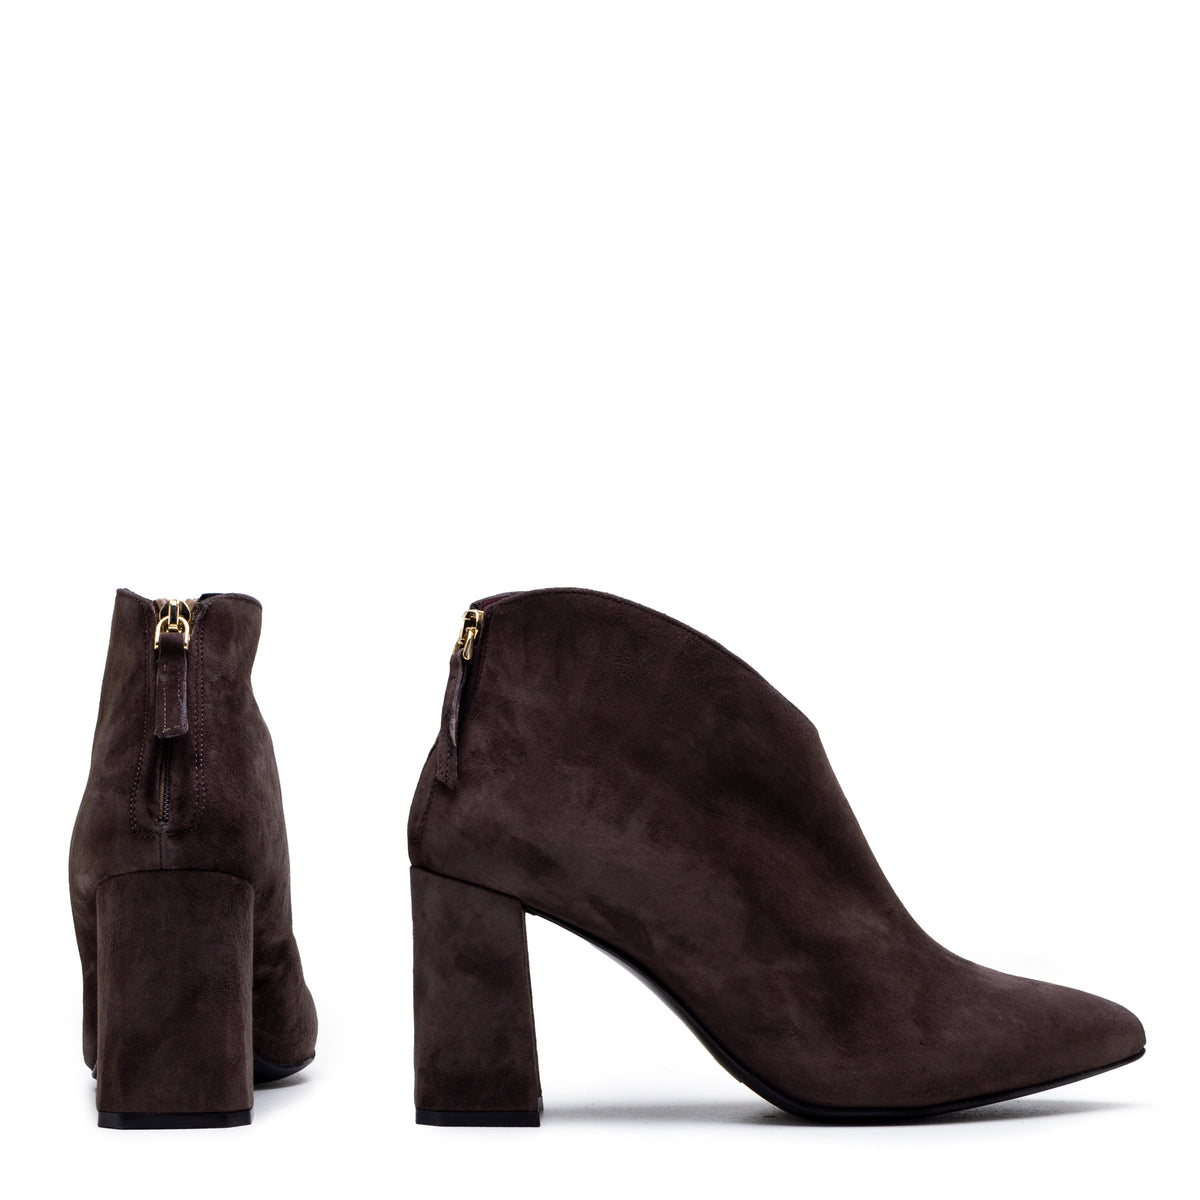 ARIADNA ANKLE BOOTIE